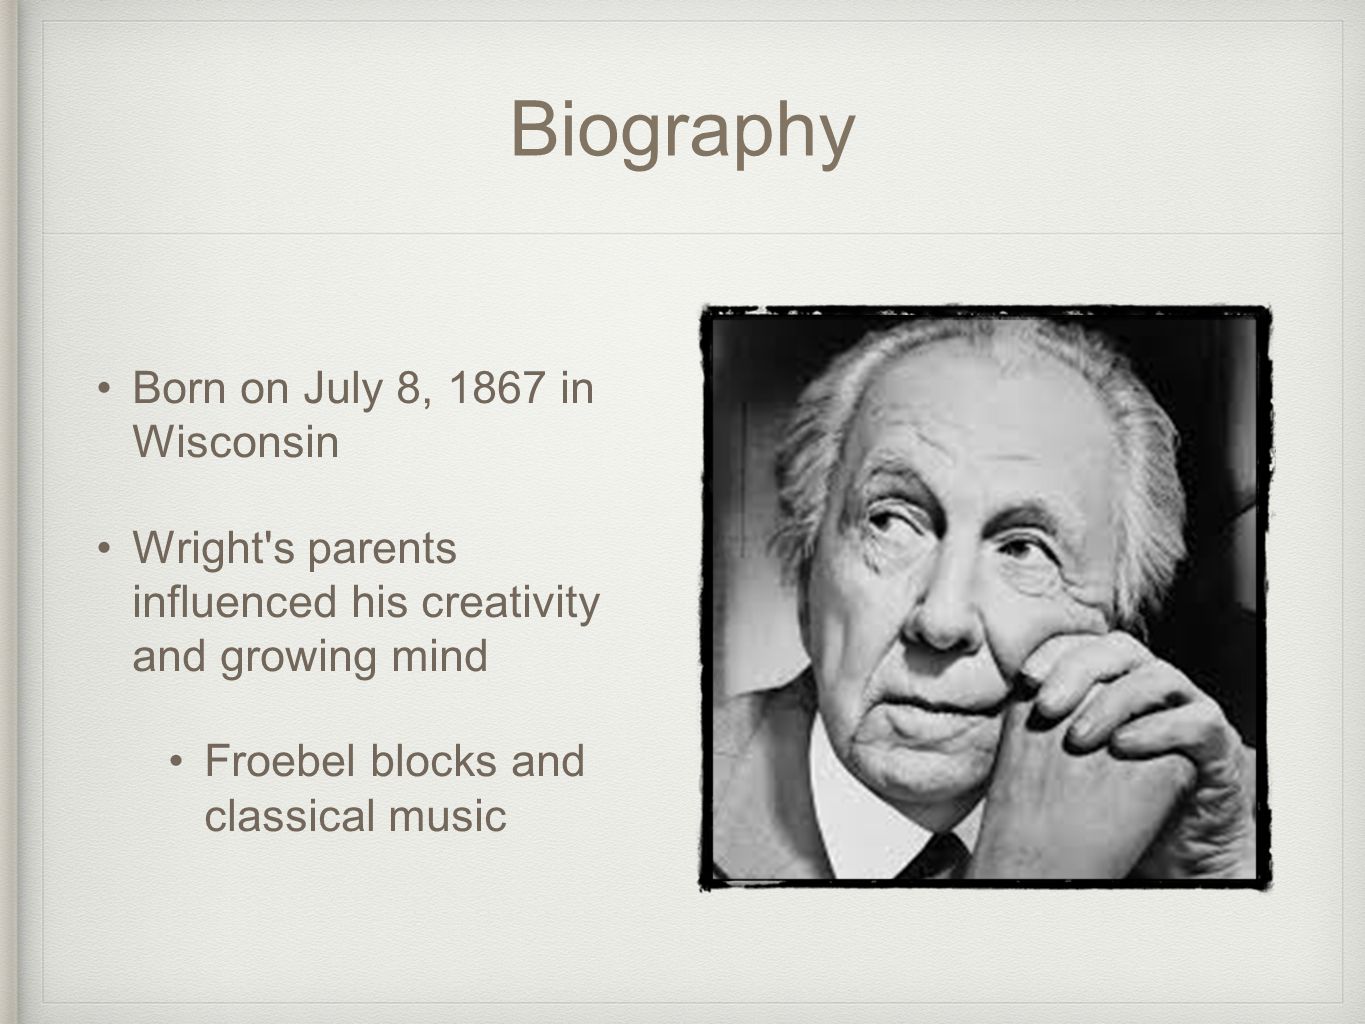 Biography Born on July 8, 1867 in Wisconsin